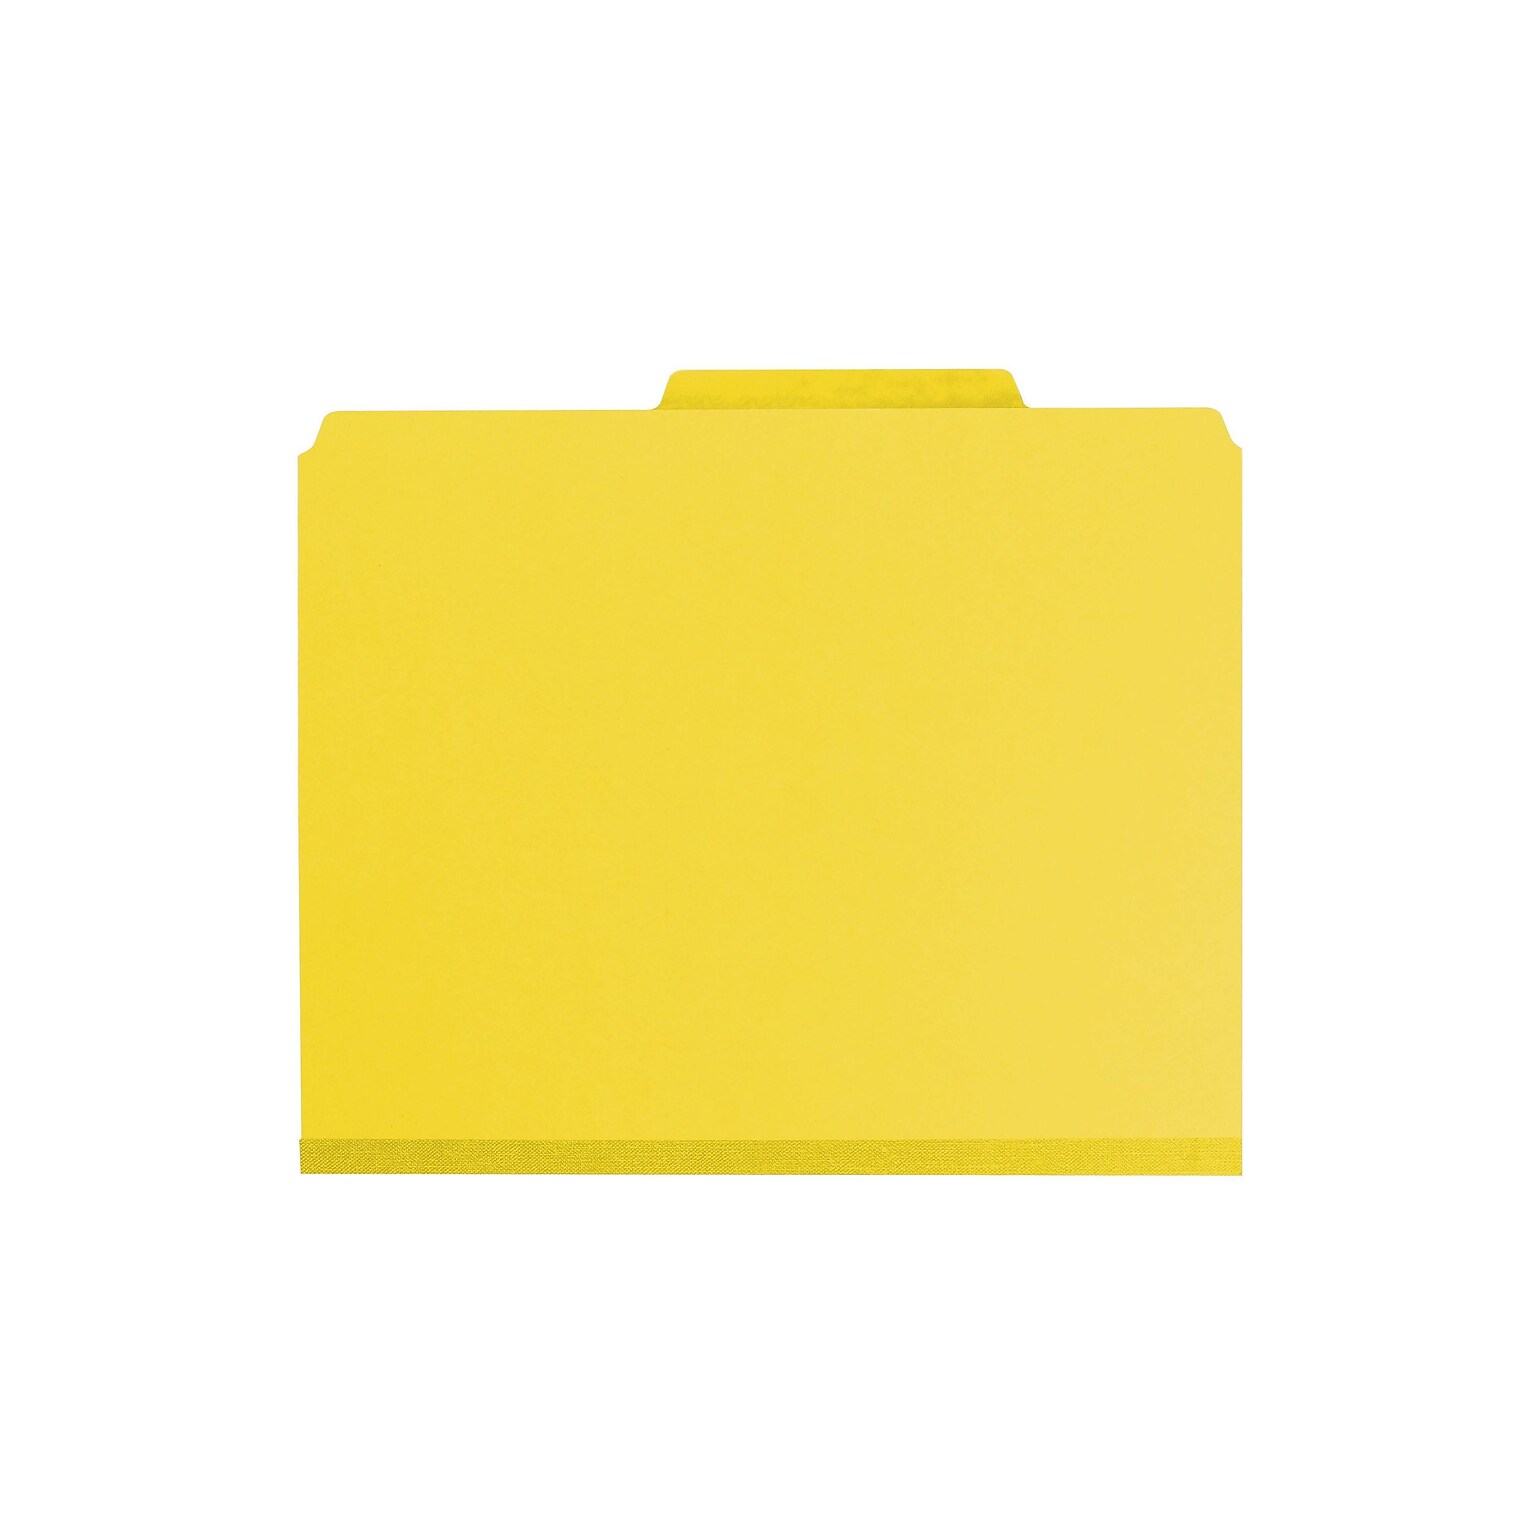 Smead Pressboard Classification Folders with SafeSHIELD Fasteners, 2 Expansion, Letter Size, 2 Dividers, Yellow, 10/Box (14084)